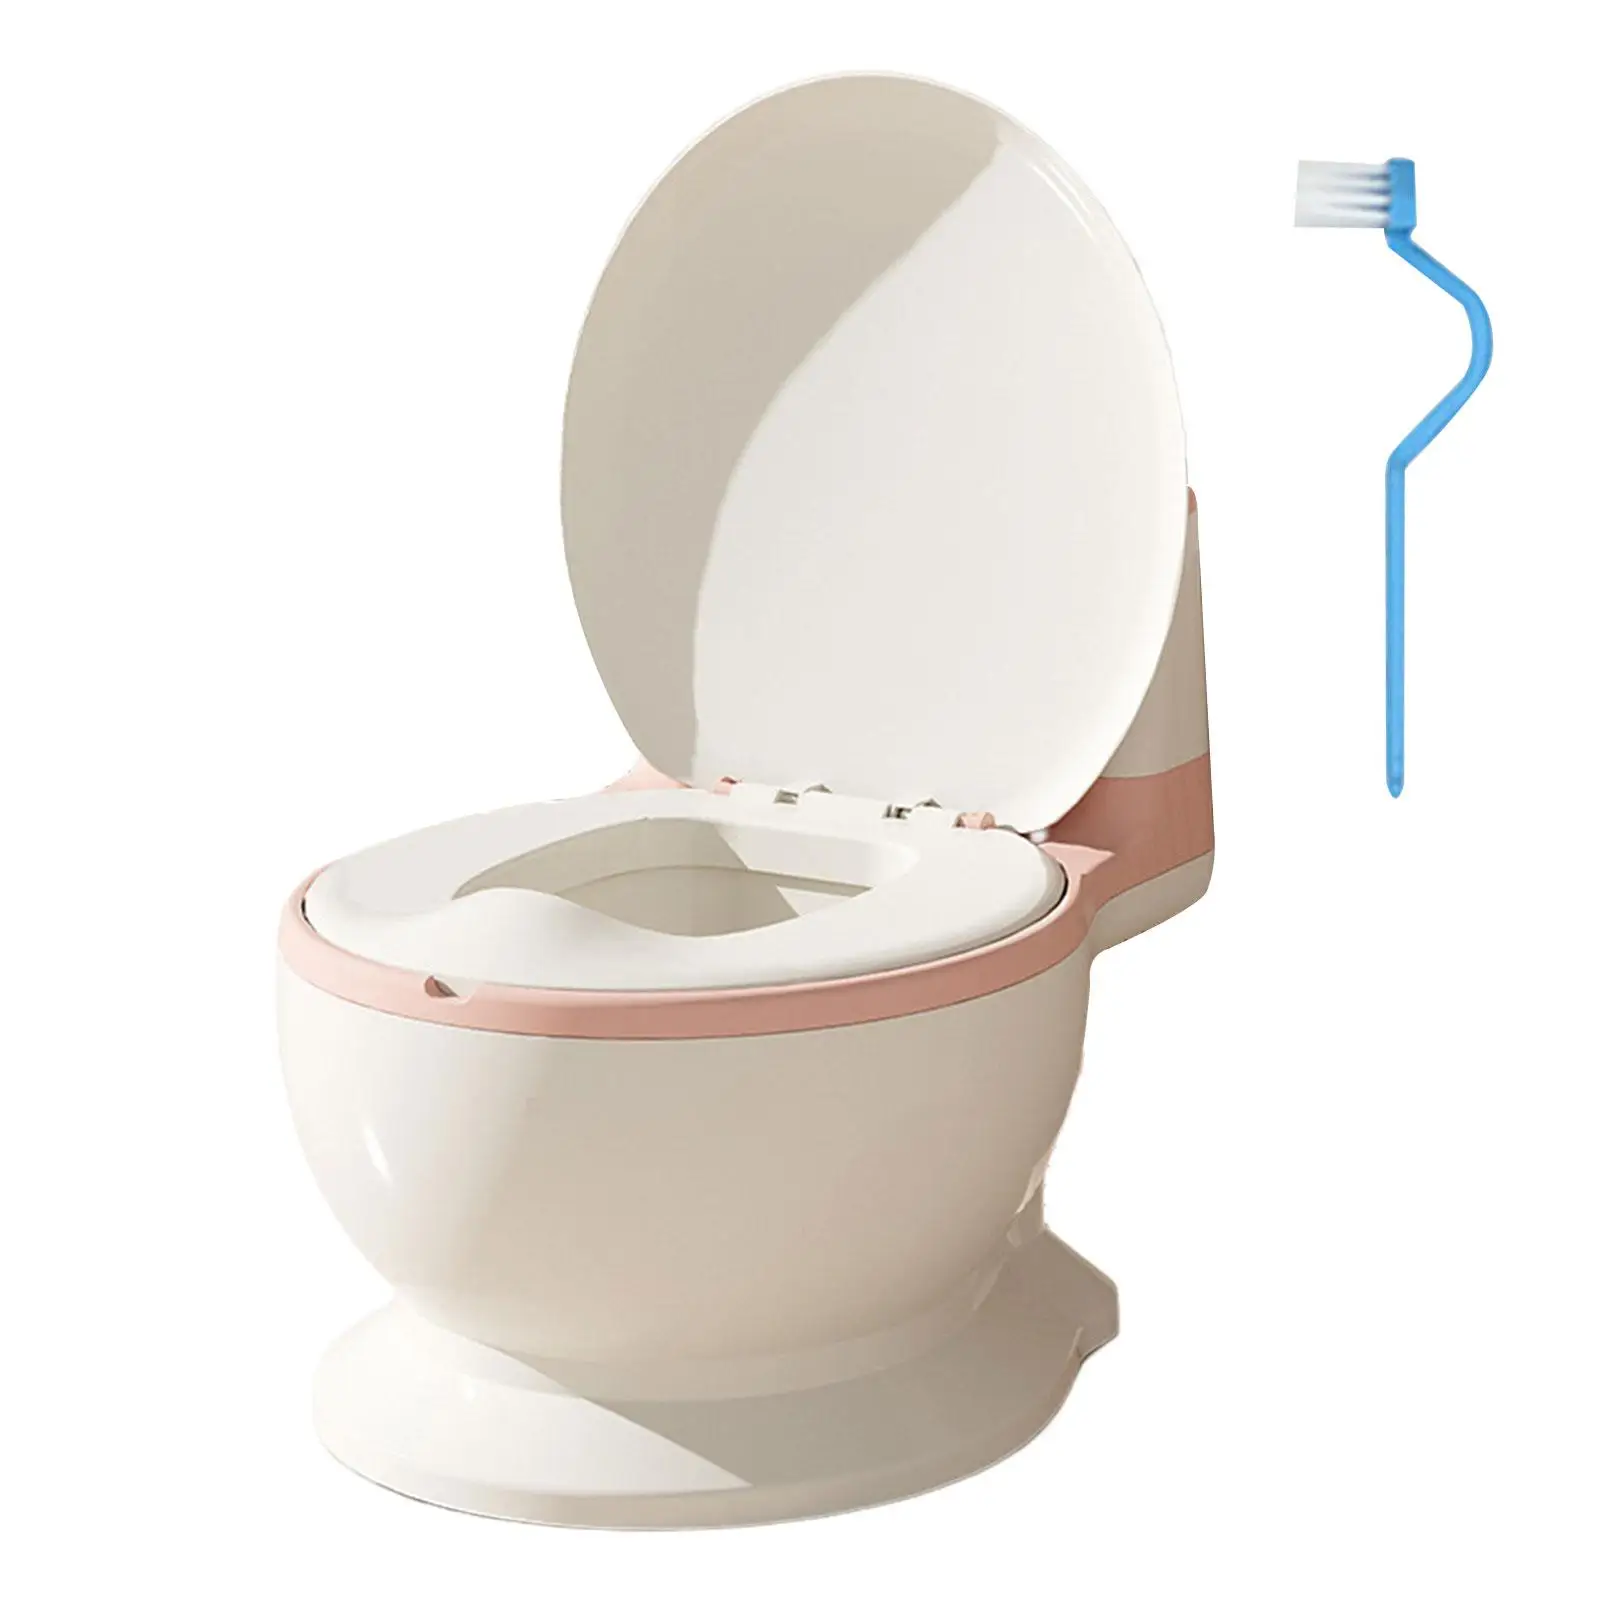 Toilet Training Potty Trainer Transition Potty Seat for Bedroom Infants